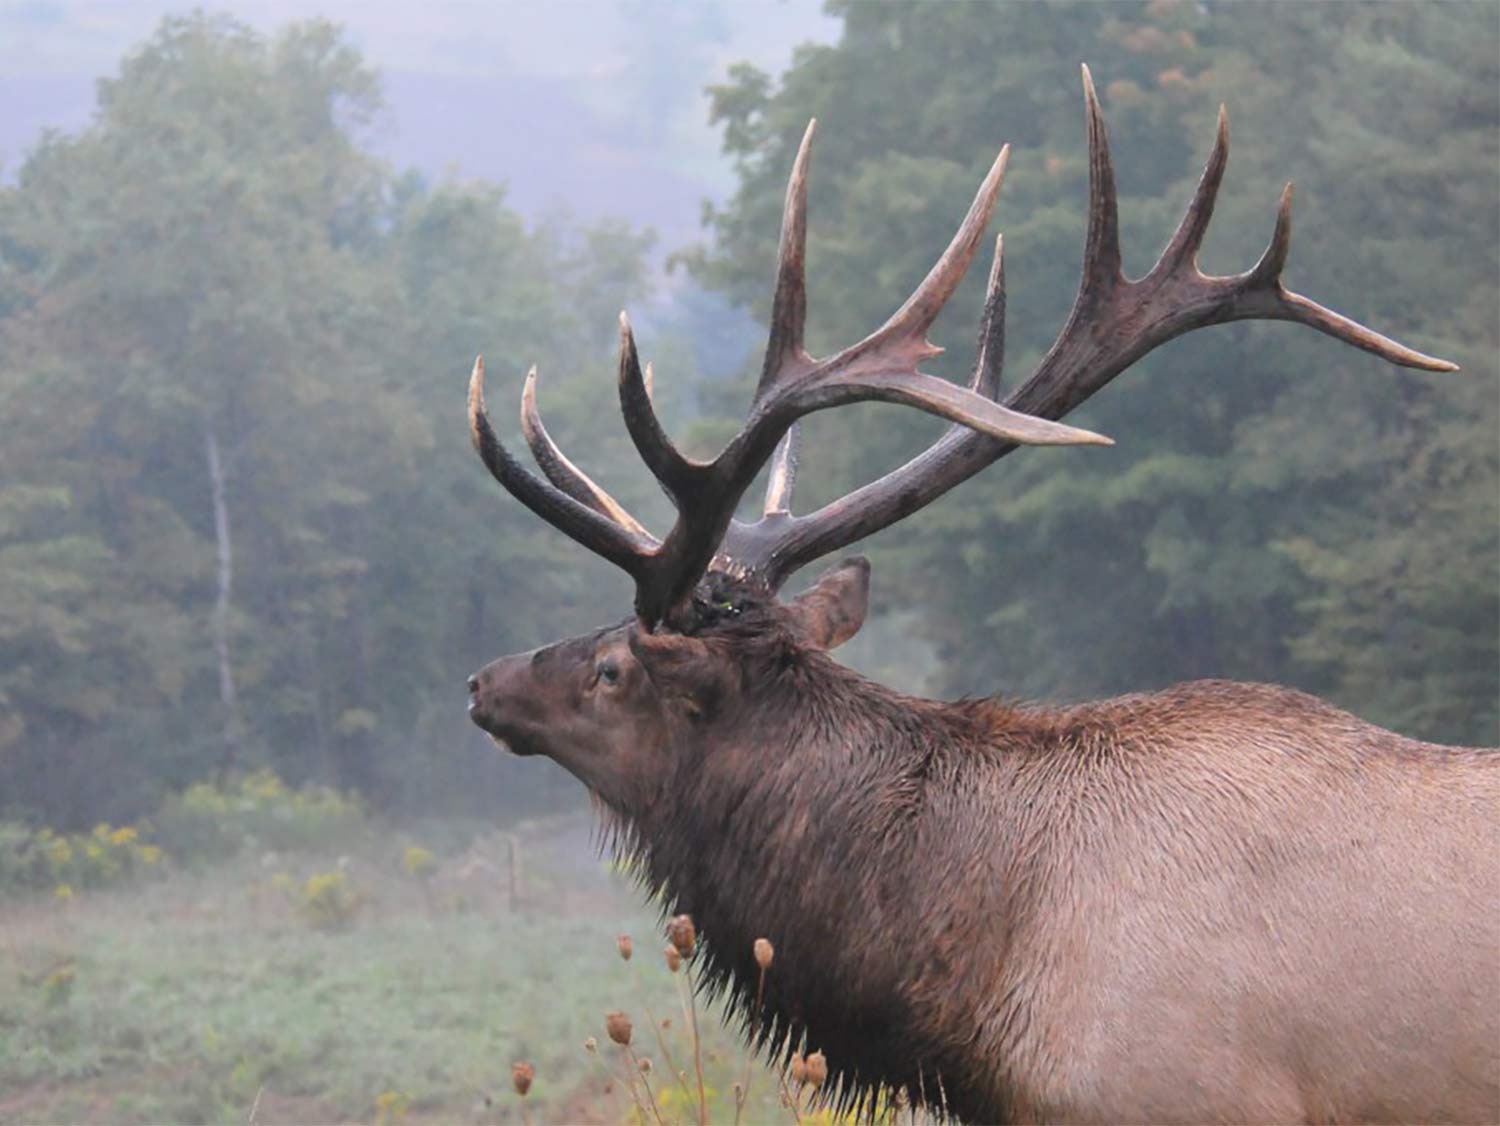 A large bull elk roams through an open clearing in a forest with fog in the background.